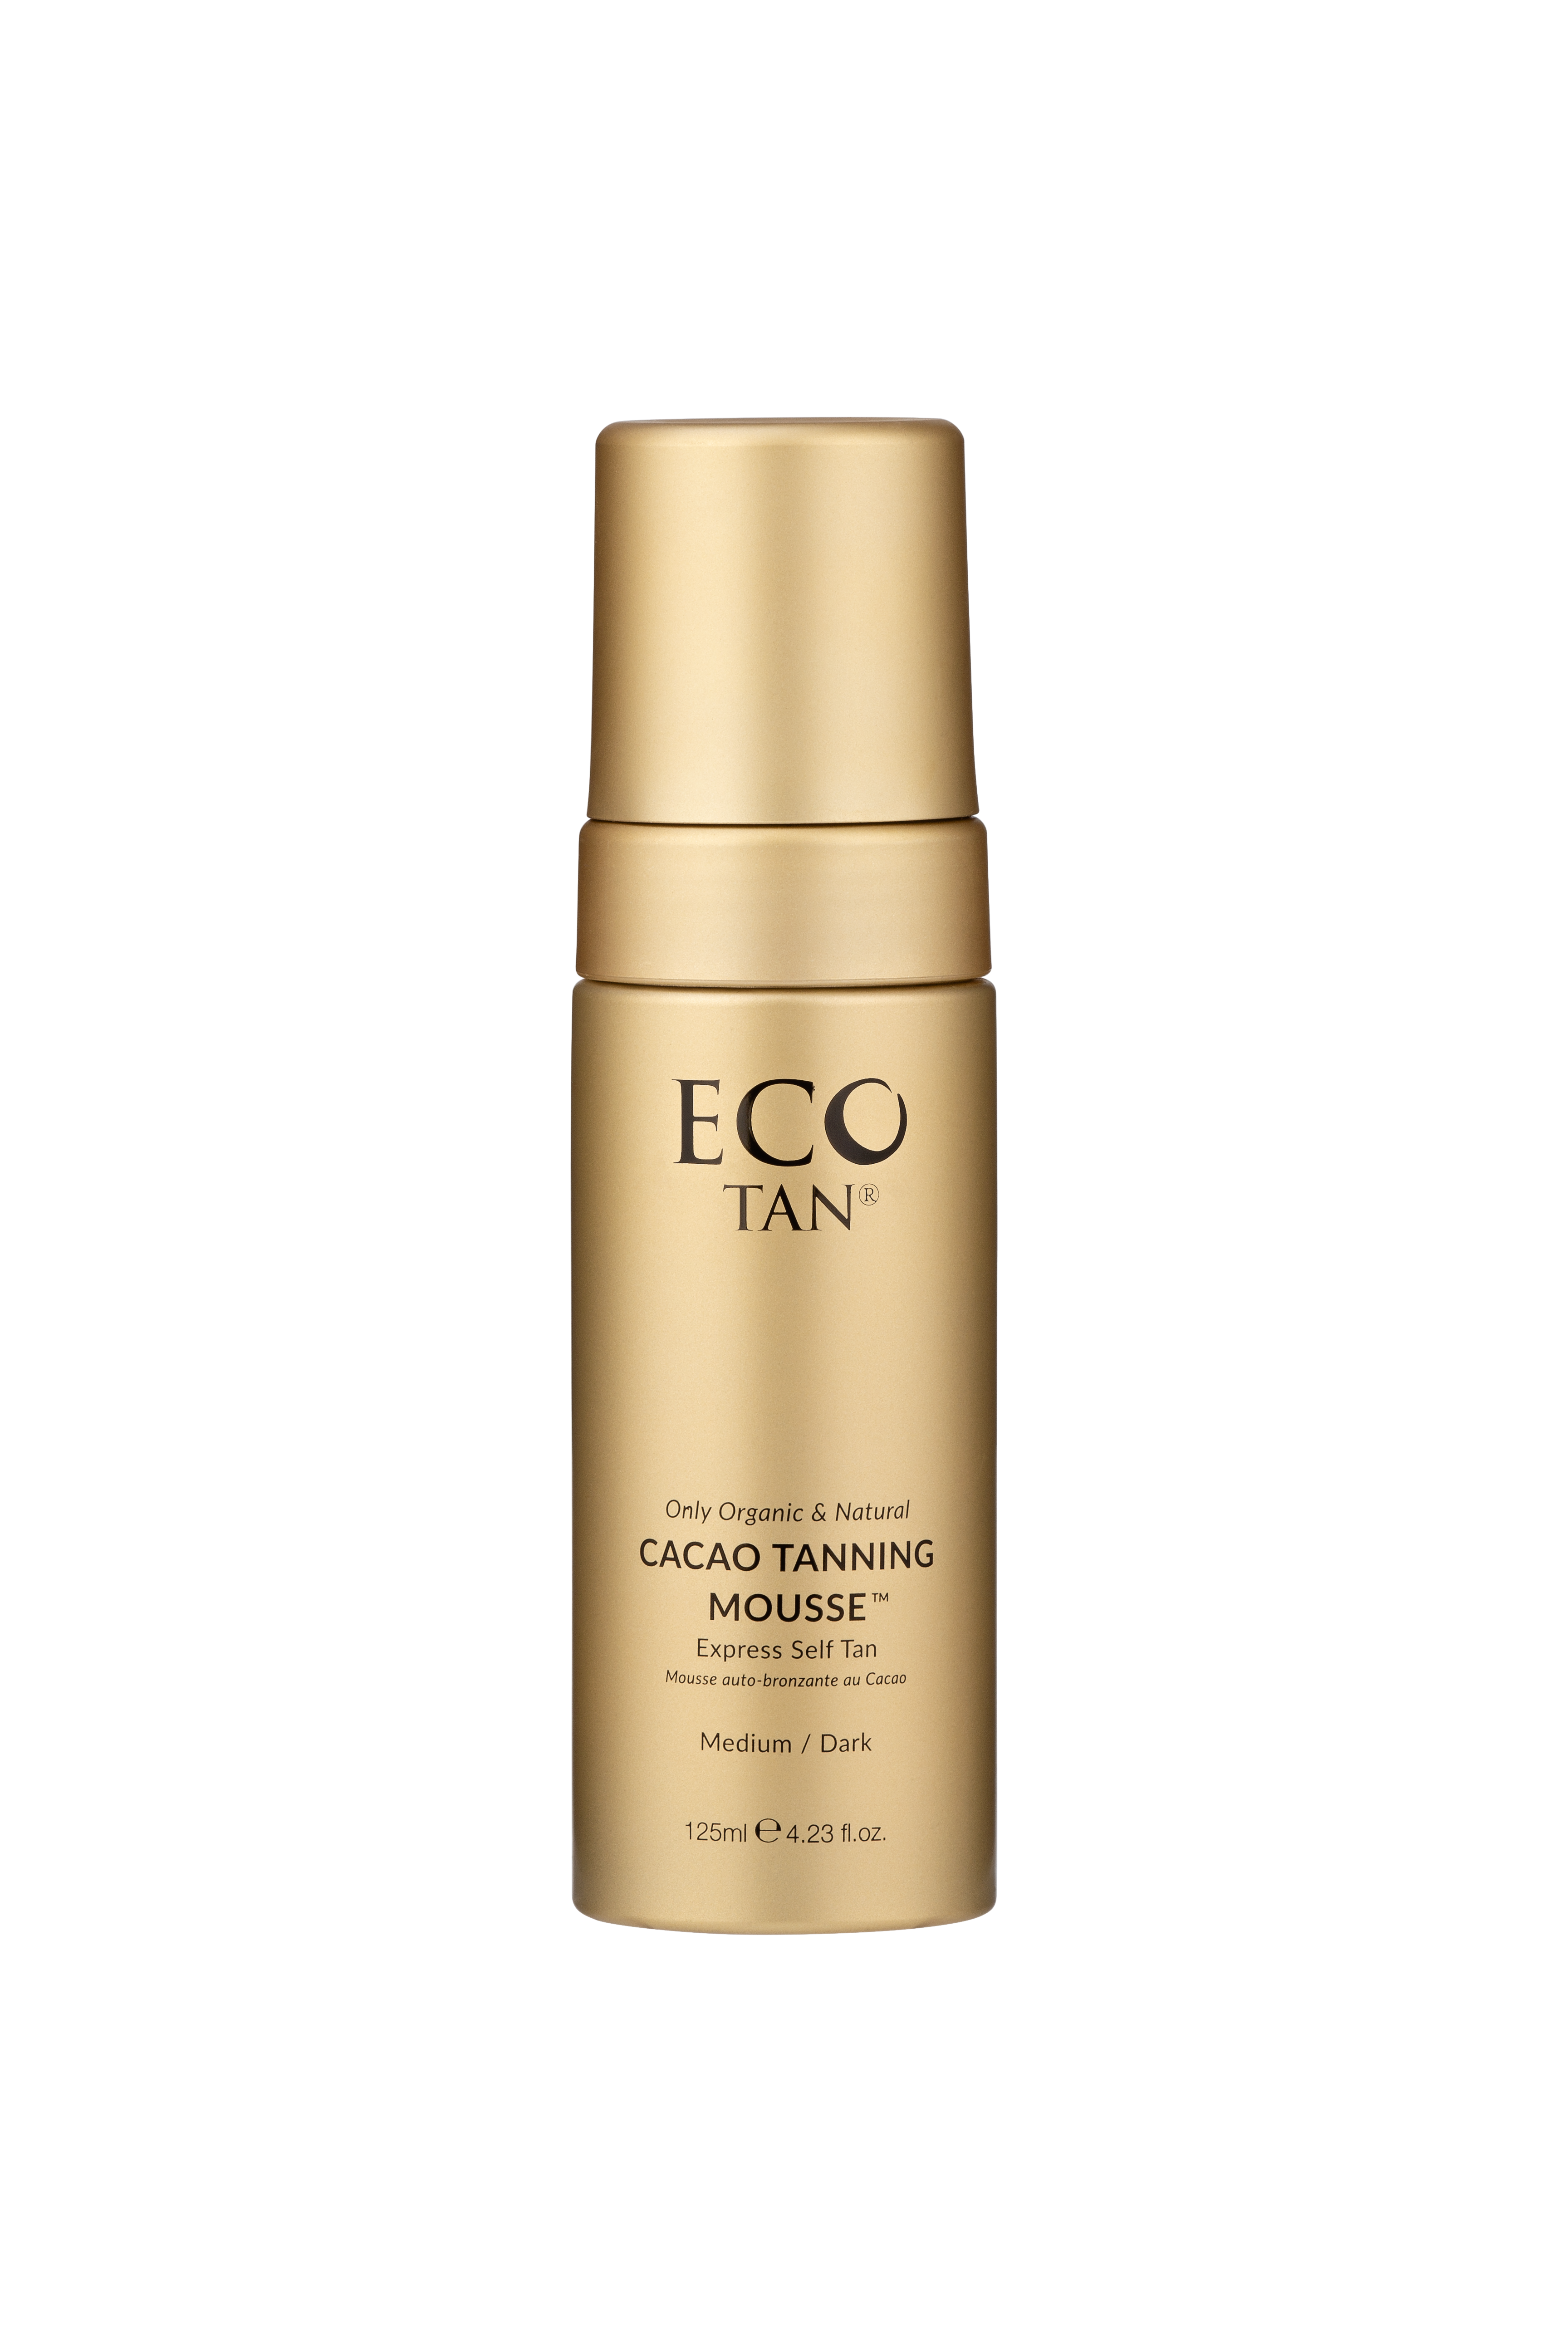 Eco Tan - Cacao Tanning Mousse